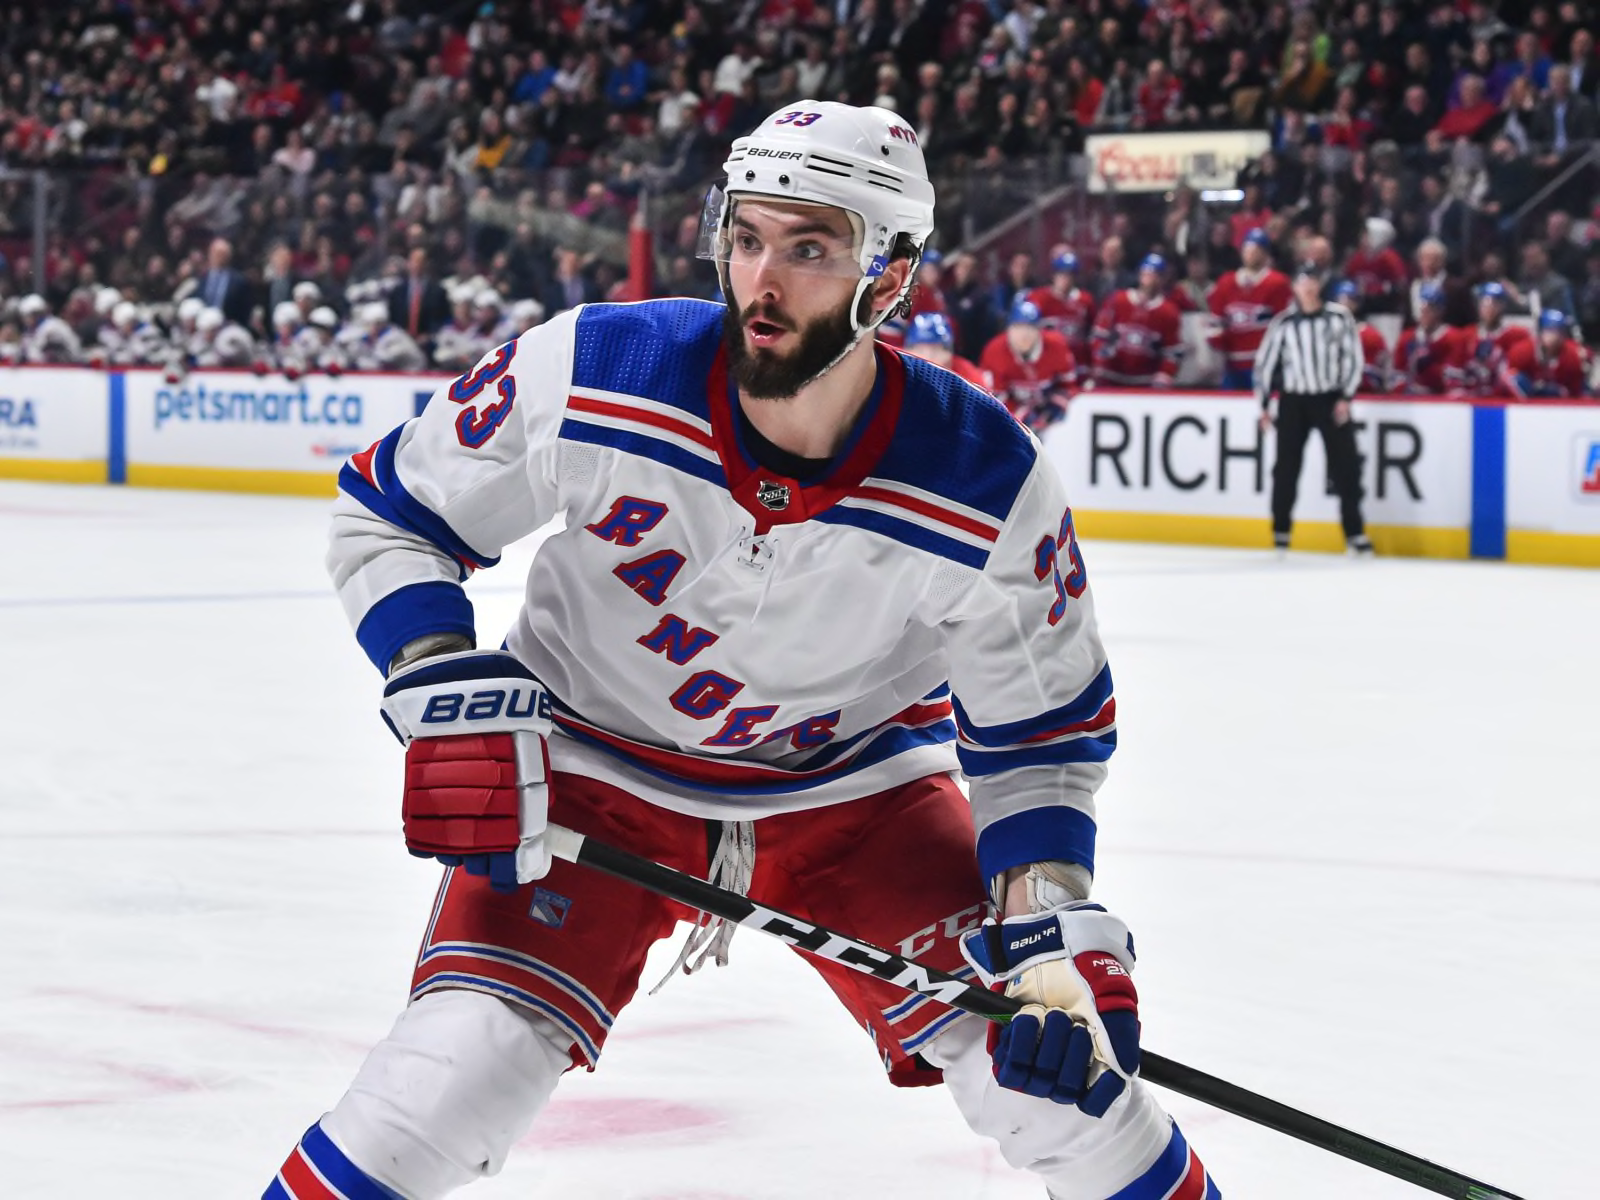 New York Rangers: More advertising on the uniforms coming